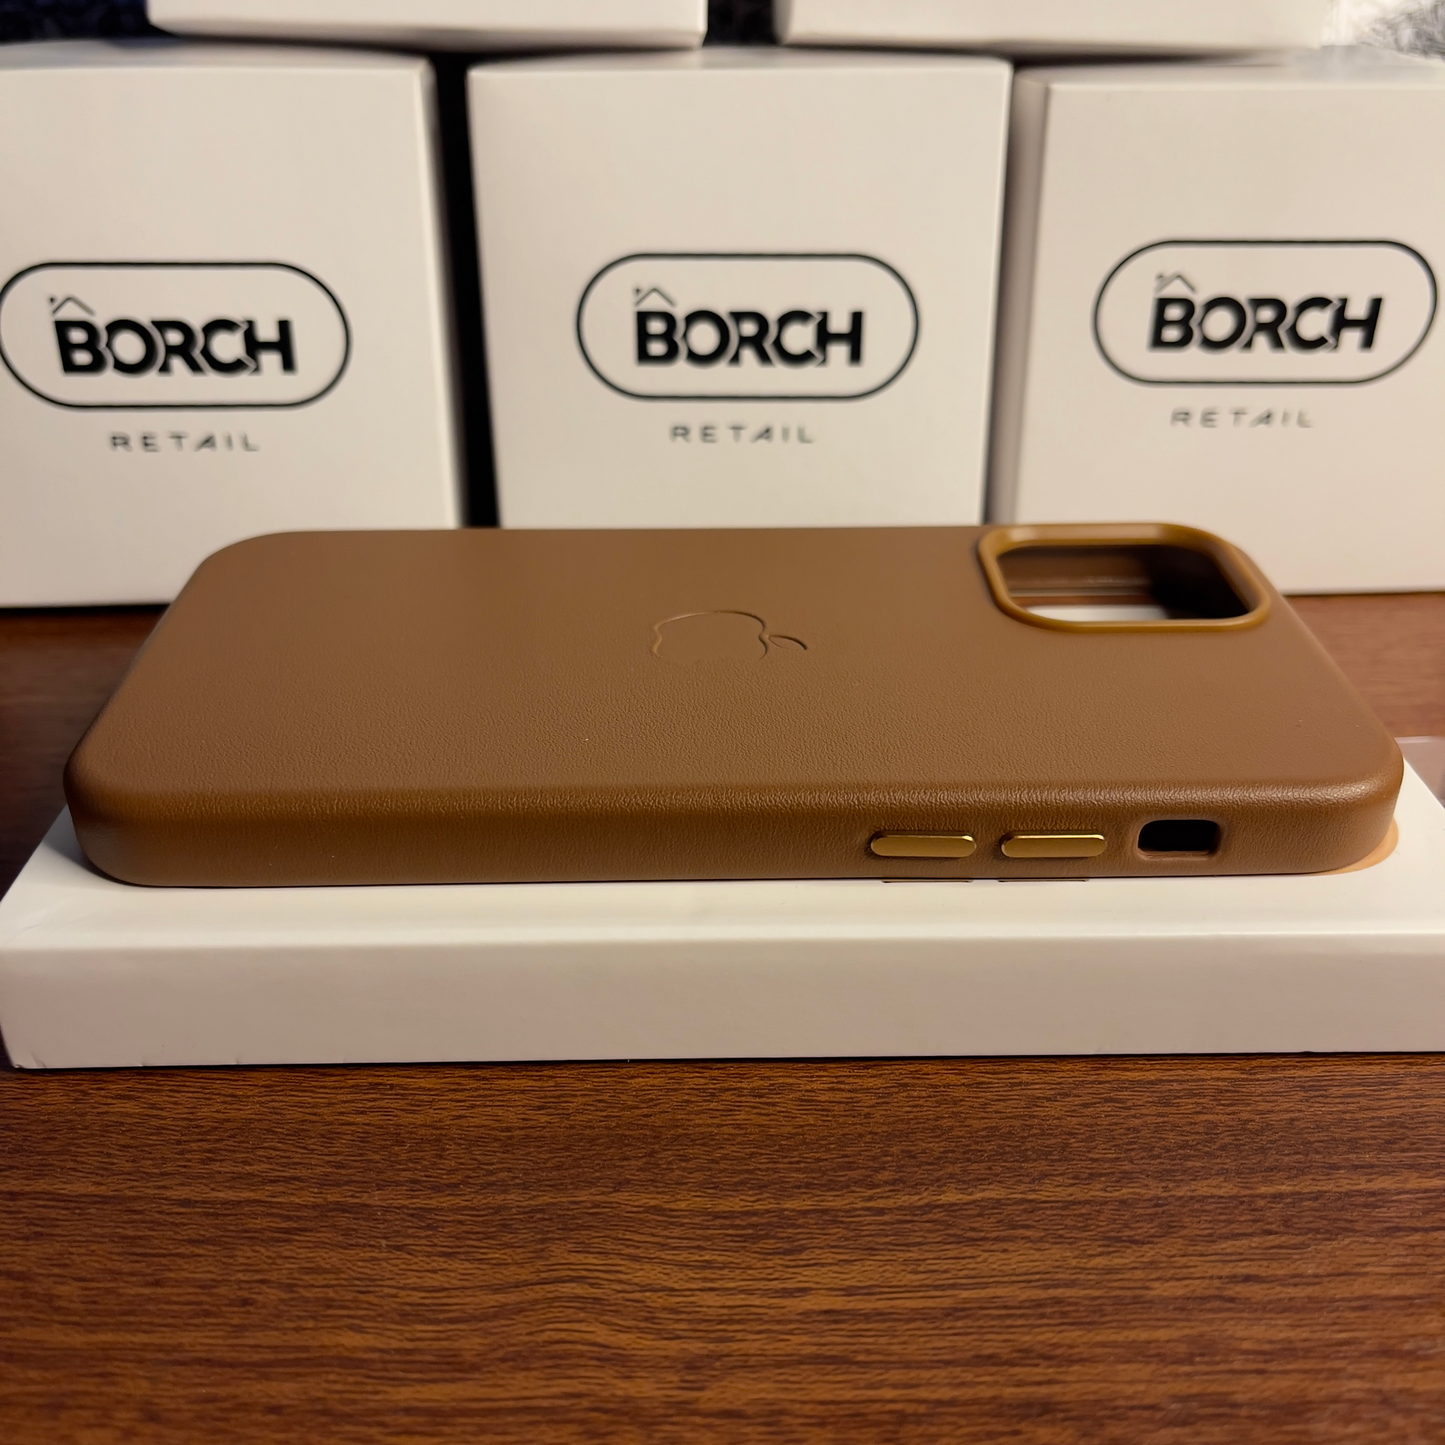 MagSafe Leather Case | iPhone 12 Normal | iPhone 12 Pro | Saddle Brown